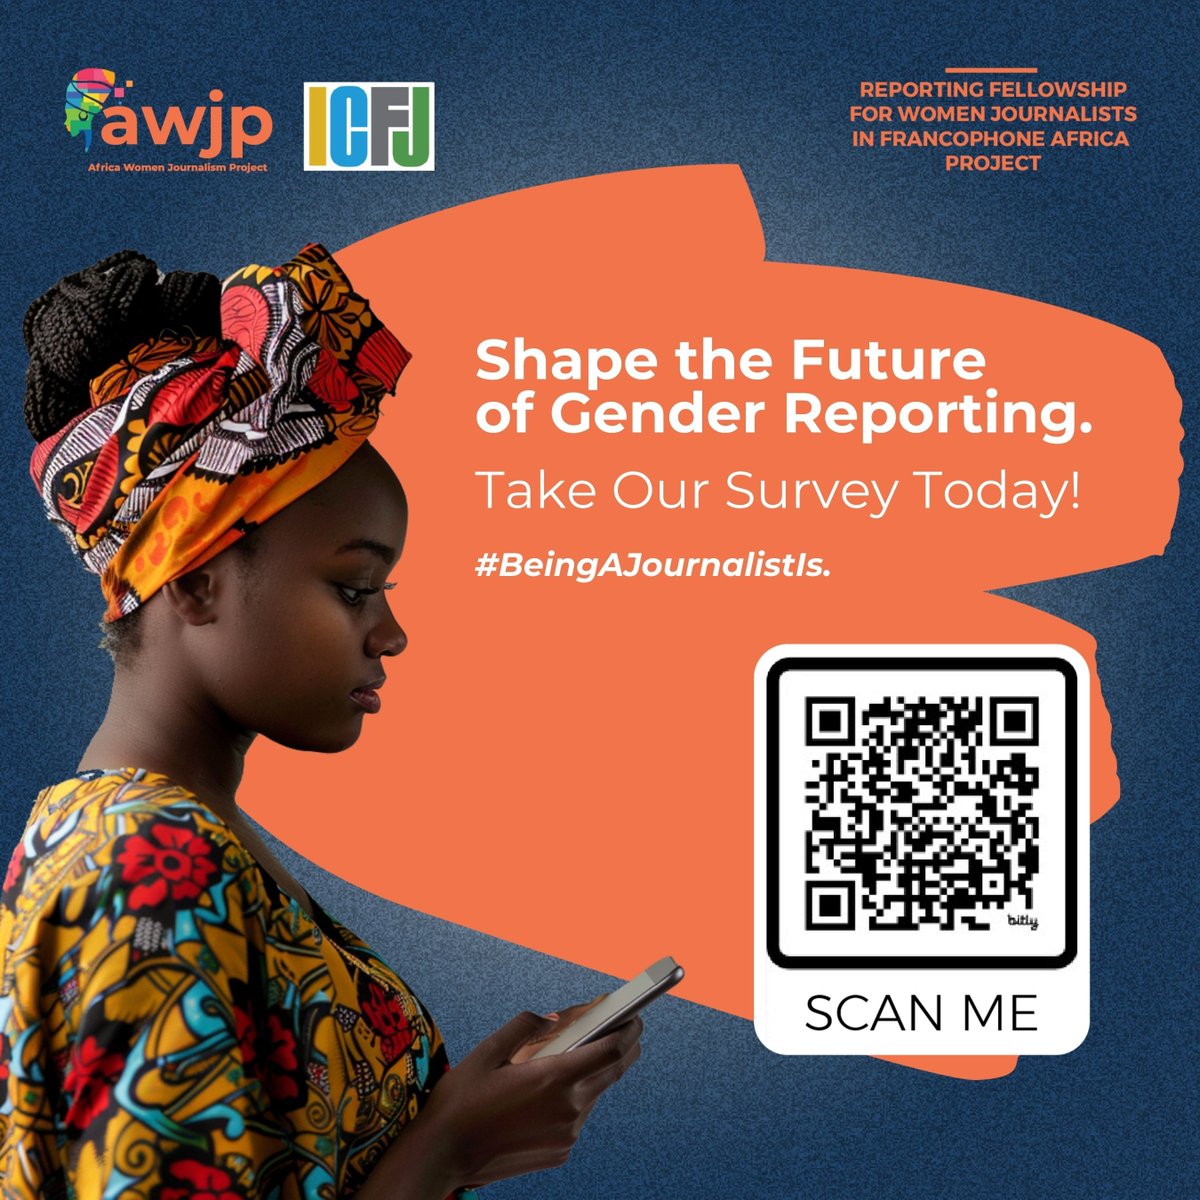 Your input in our survey will shape future programs benefitting women journalists and gender reporting in Francophone, Africa. Take our survey here bit.ly/43TA7Yn #BeingAJournalistIs #MediaSurvey